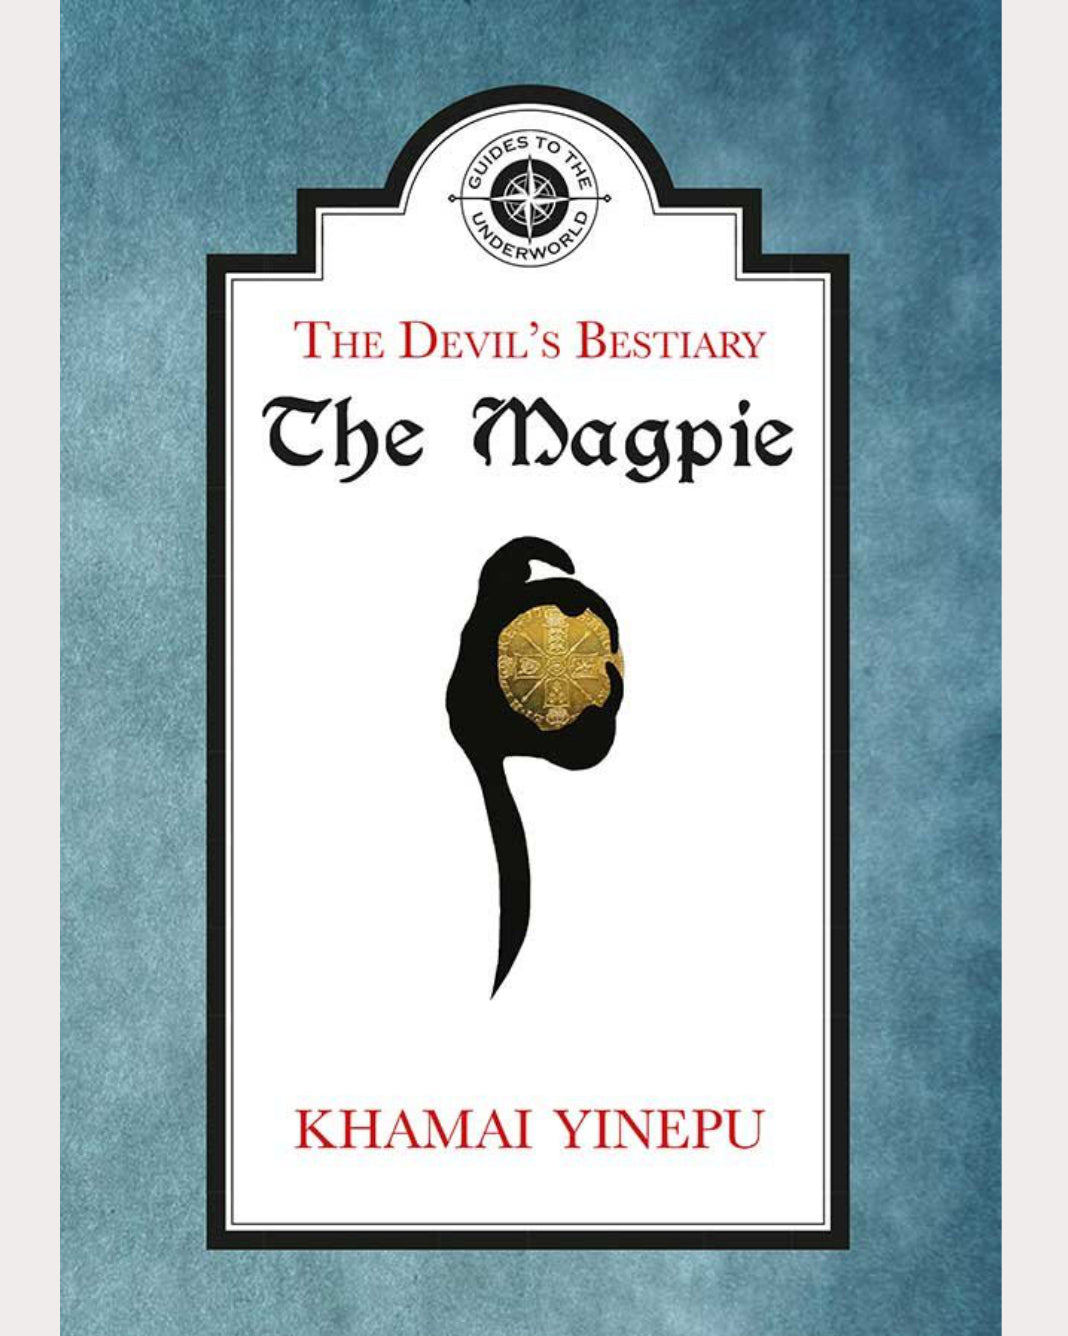 The Devil's Bestiary: The Magpie